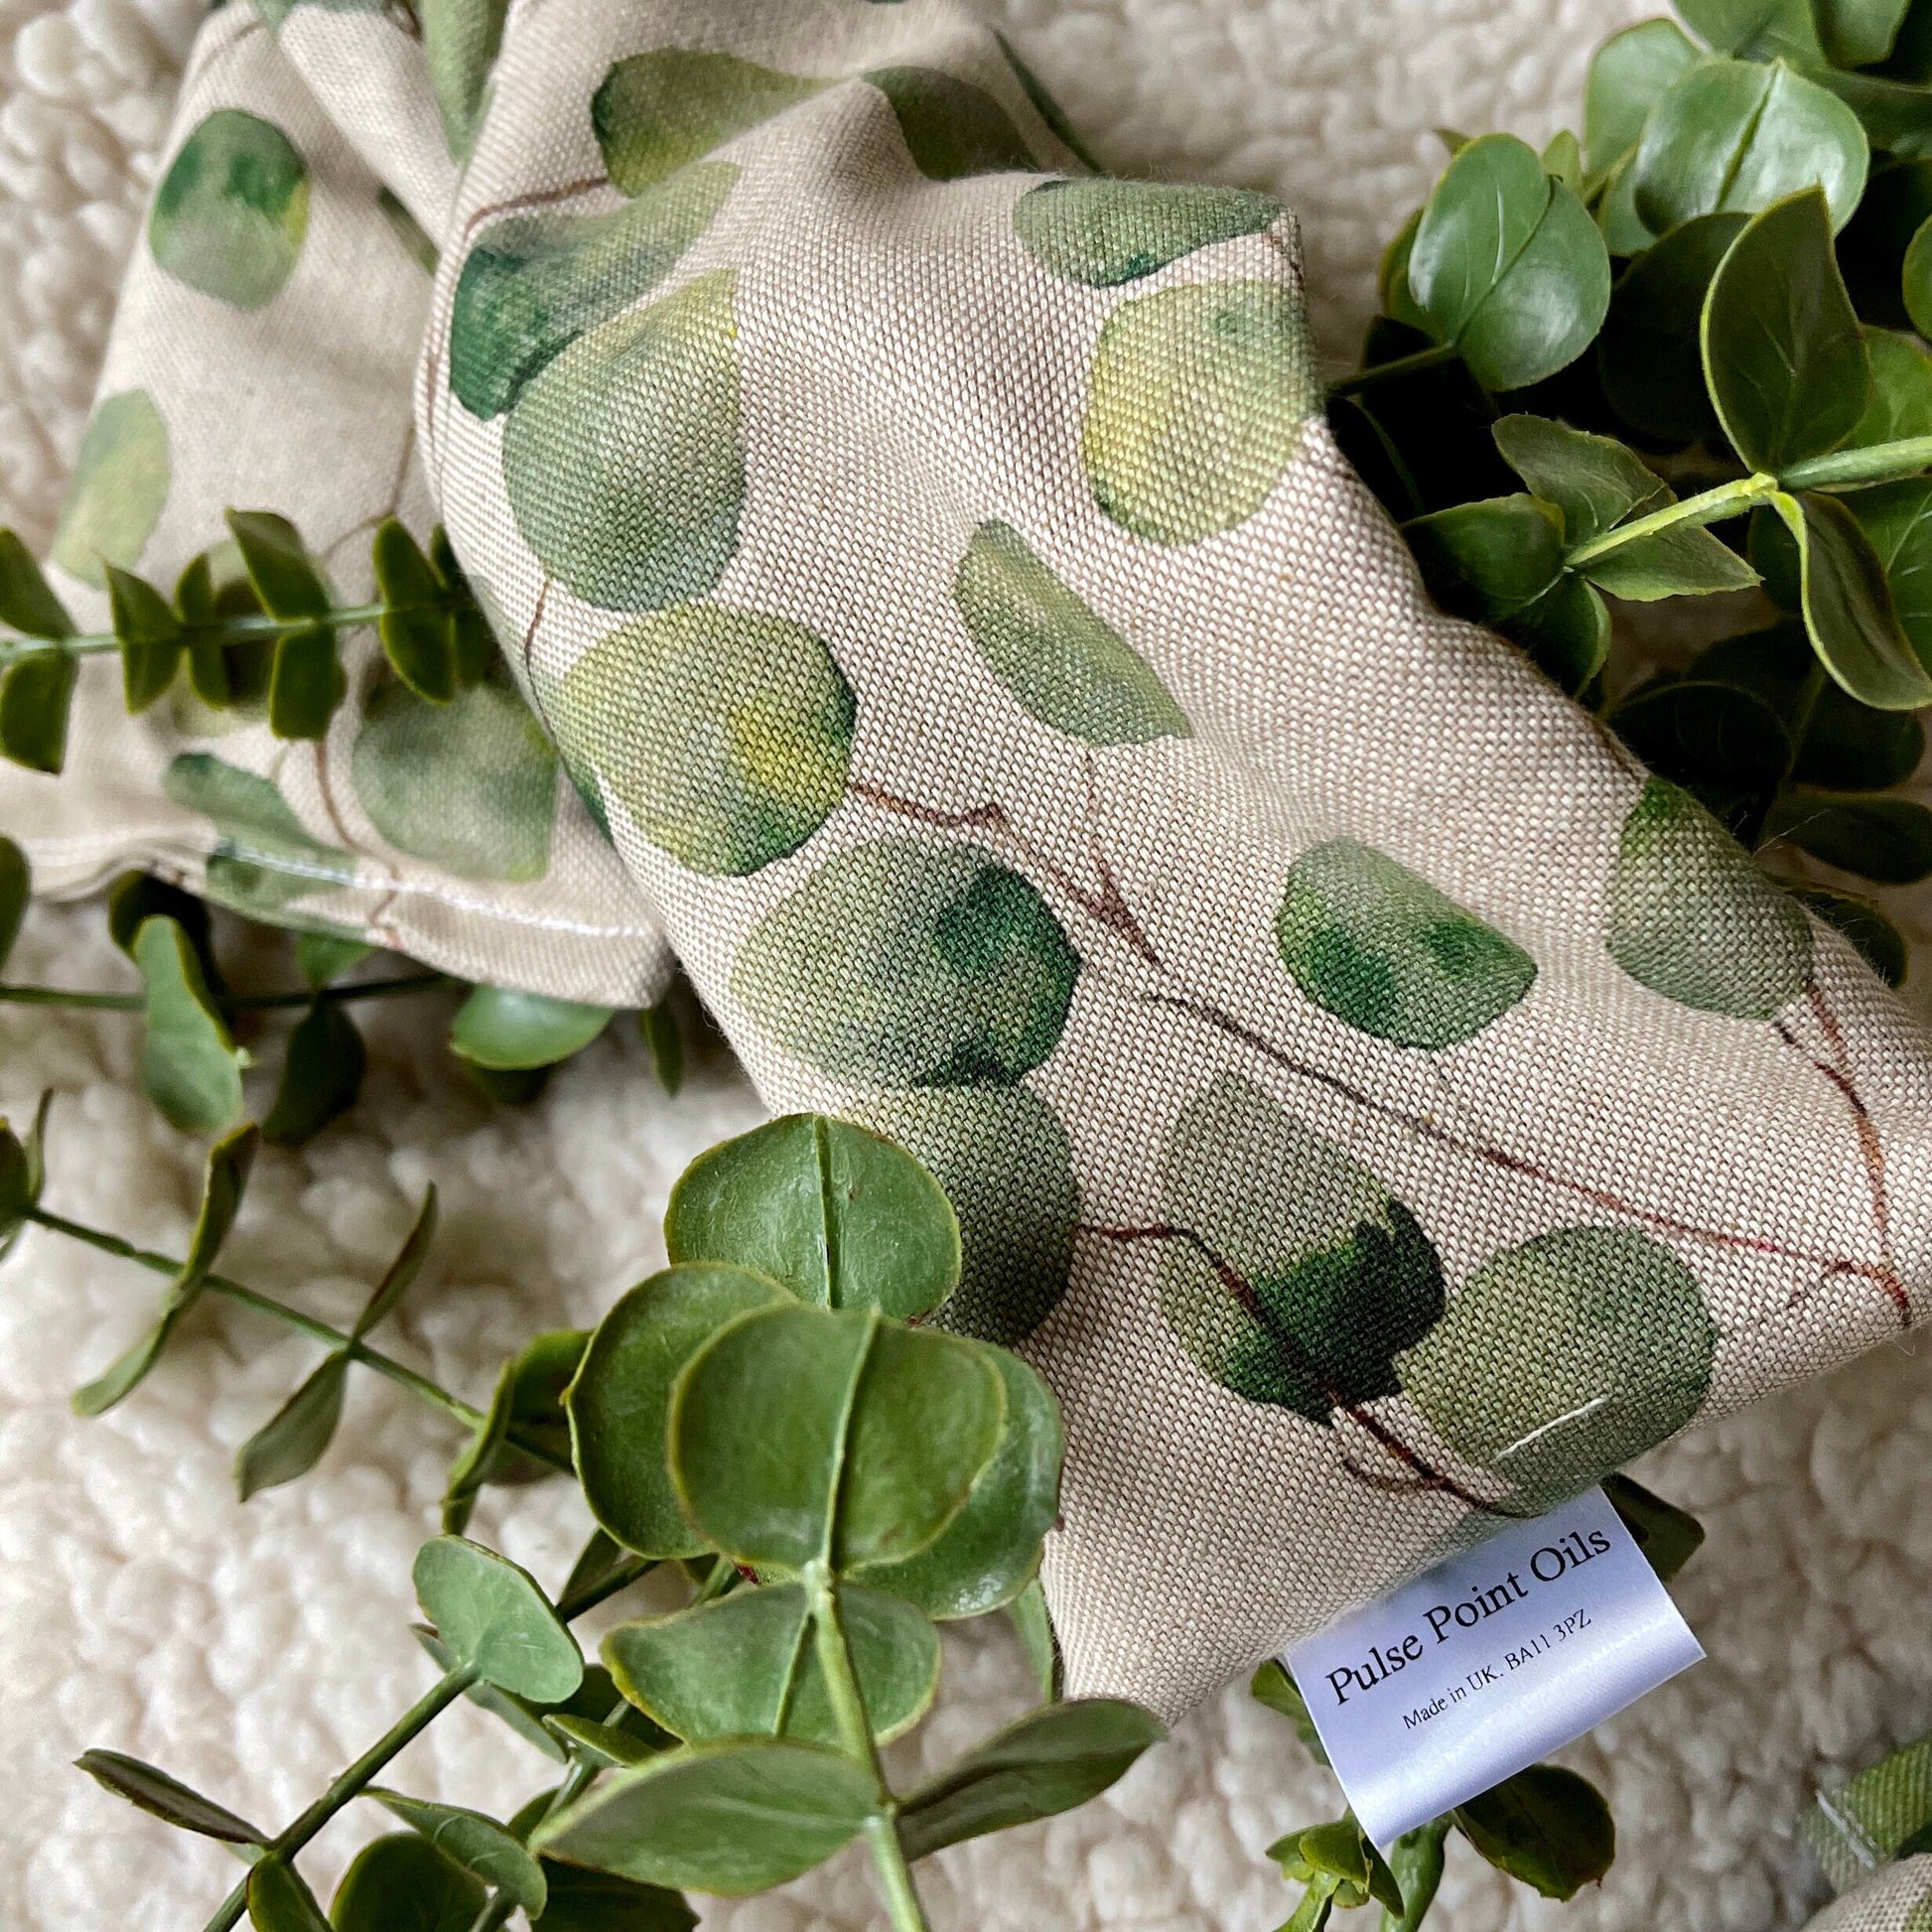 practical wellbeing gift eucalyptus printed cotton wheat bags and eye pillows. Made in the UK with free postage and gift wrap available